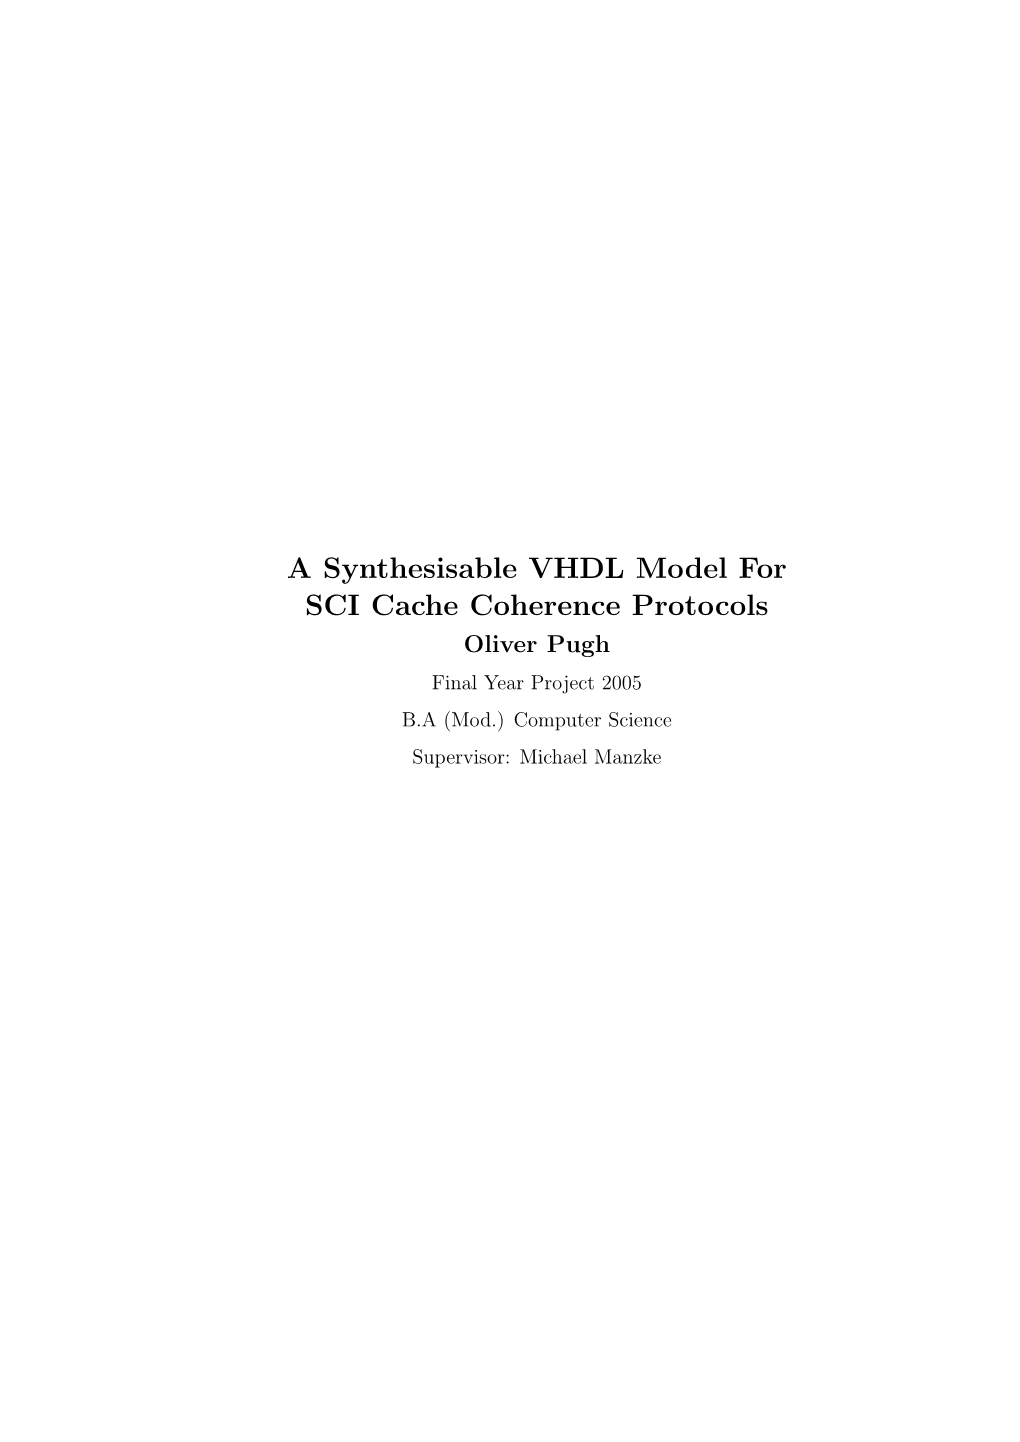 A Synthesisable VHDL Model for SCI Cache Coherence Protocols